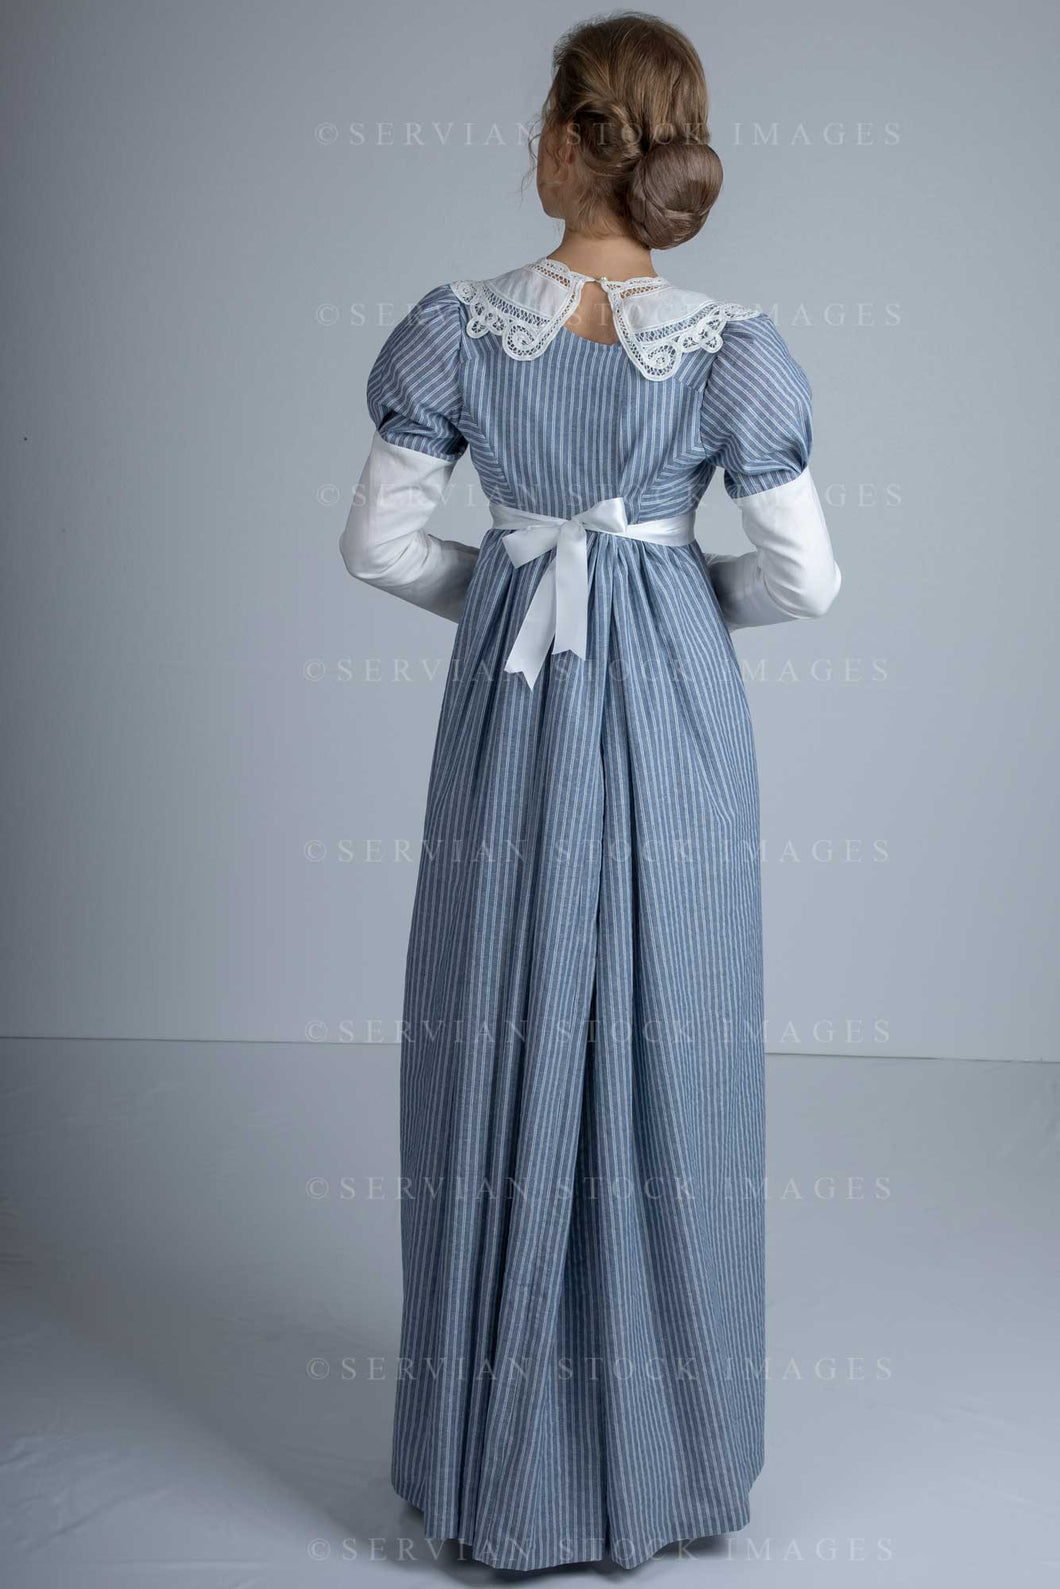 Regency woman in a striped cotton dress with a lace collar (Amalia 0628)